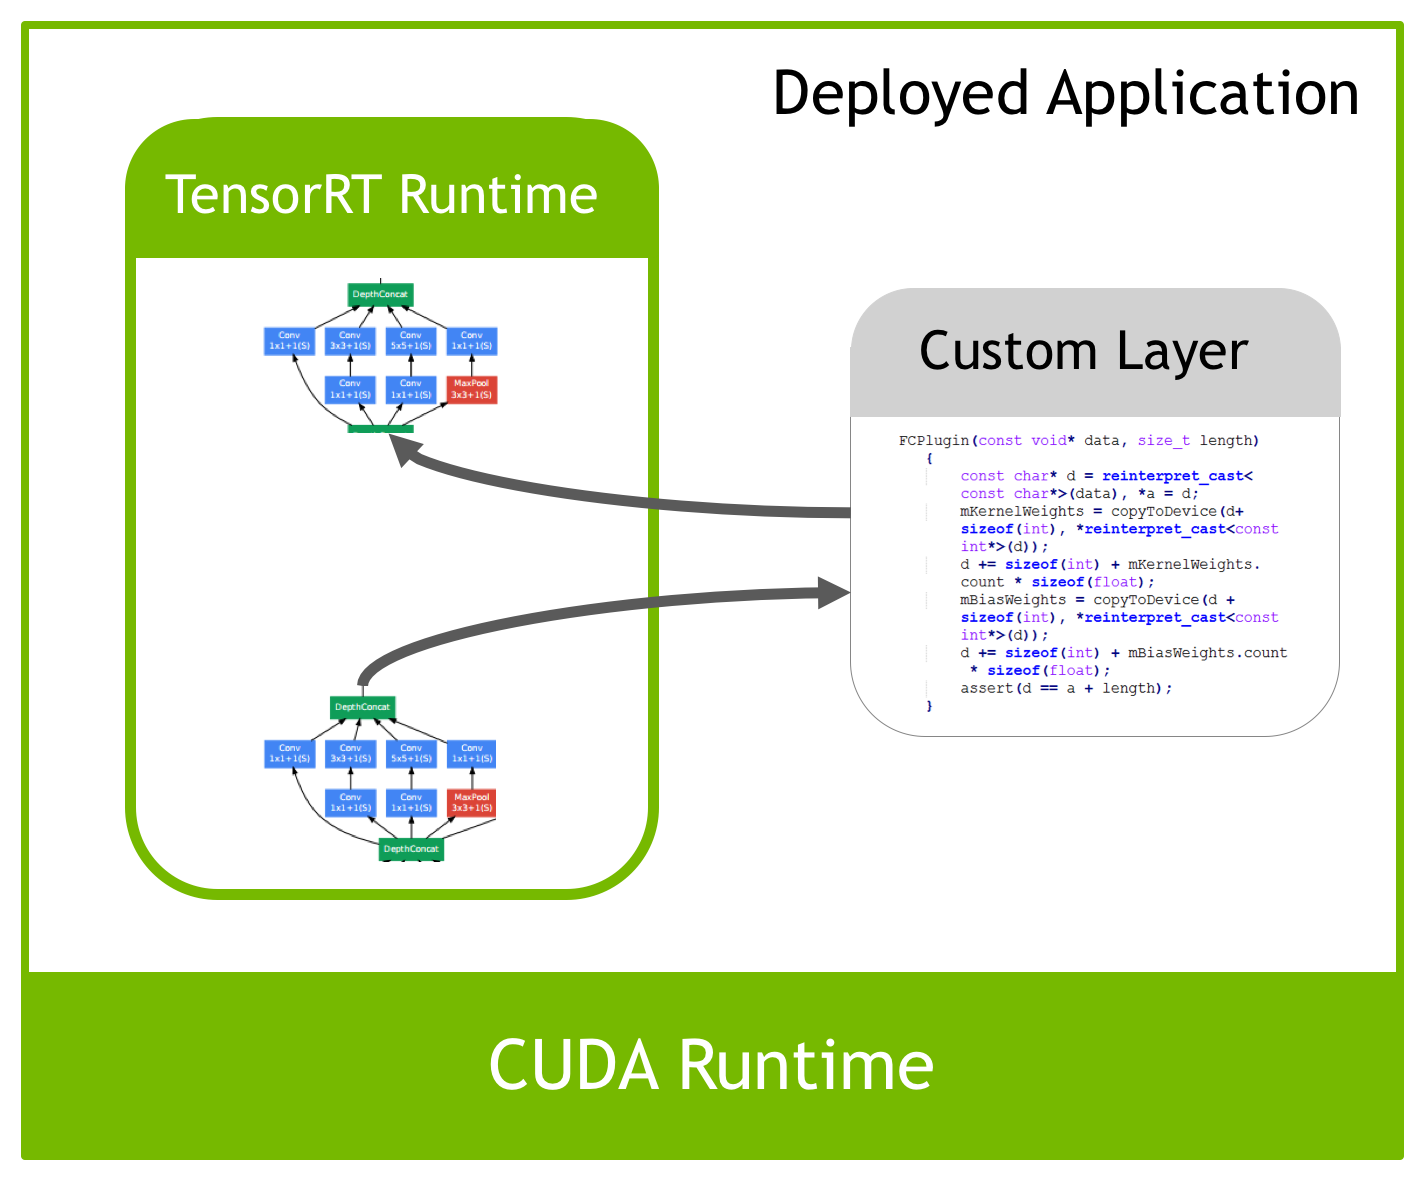 Figure 3. Custom layers can be integrated into the TensorRT runtime as plugins.